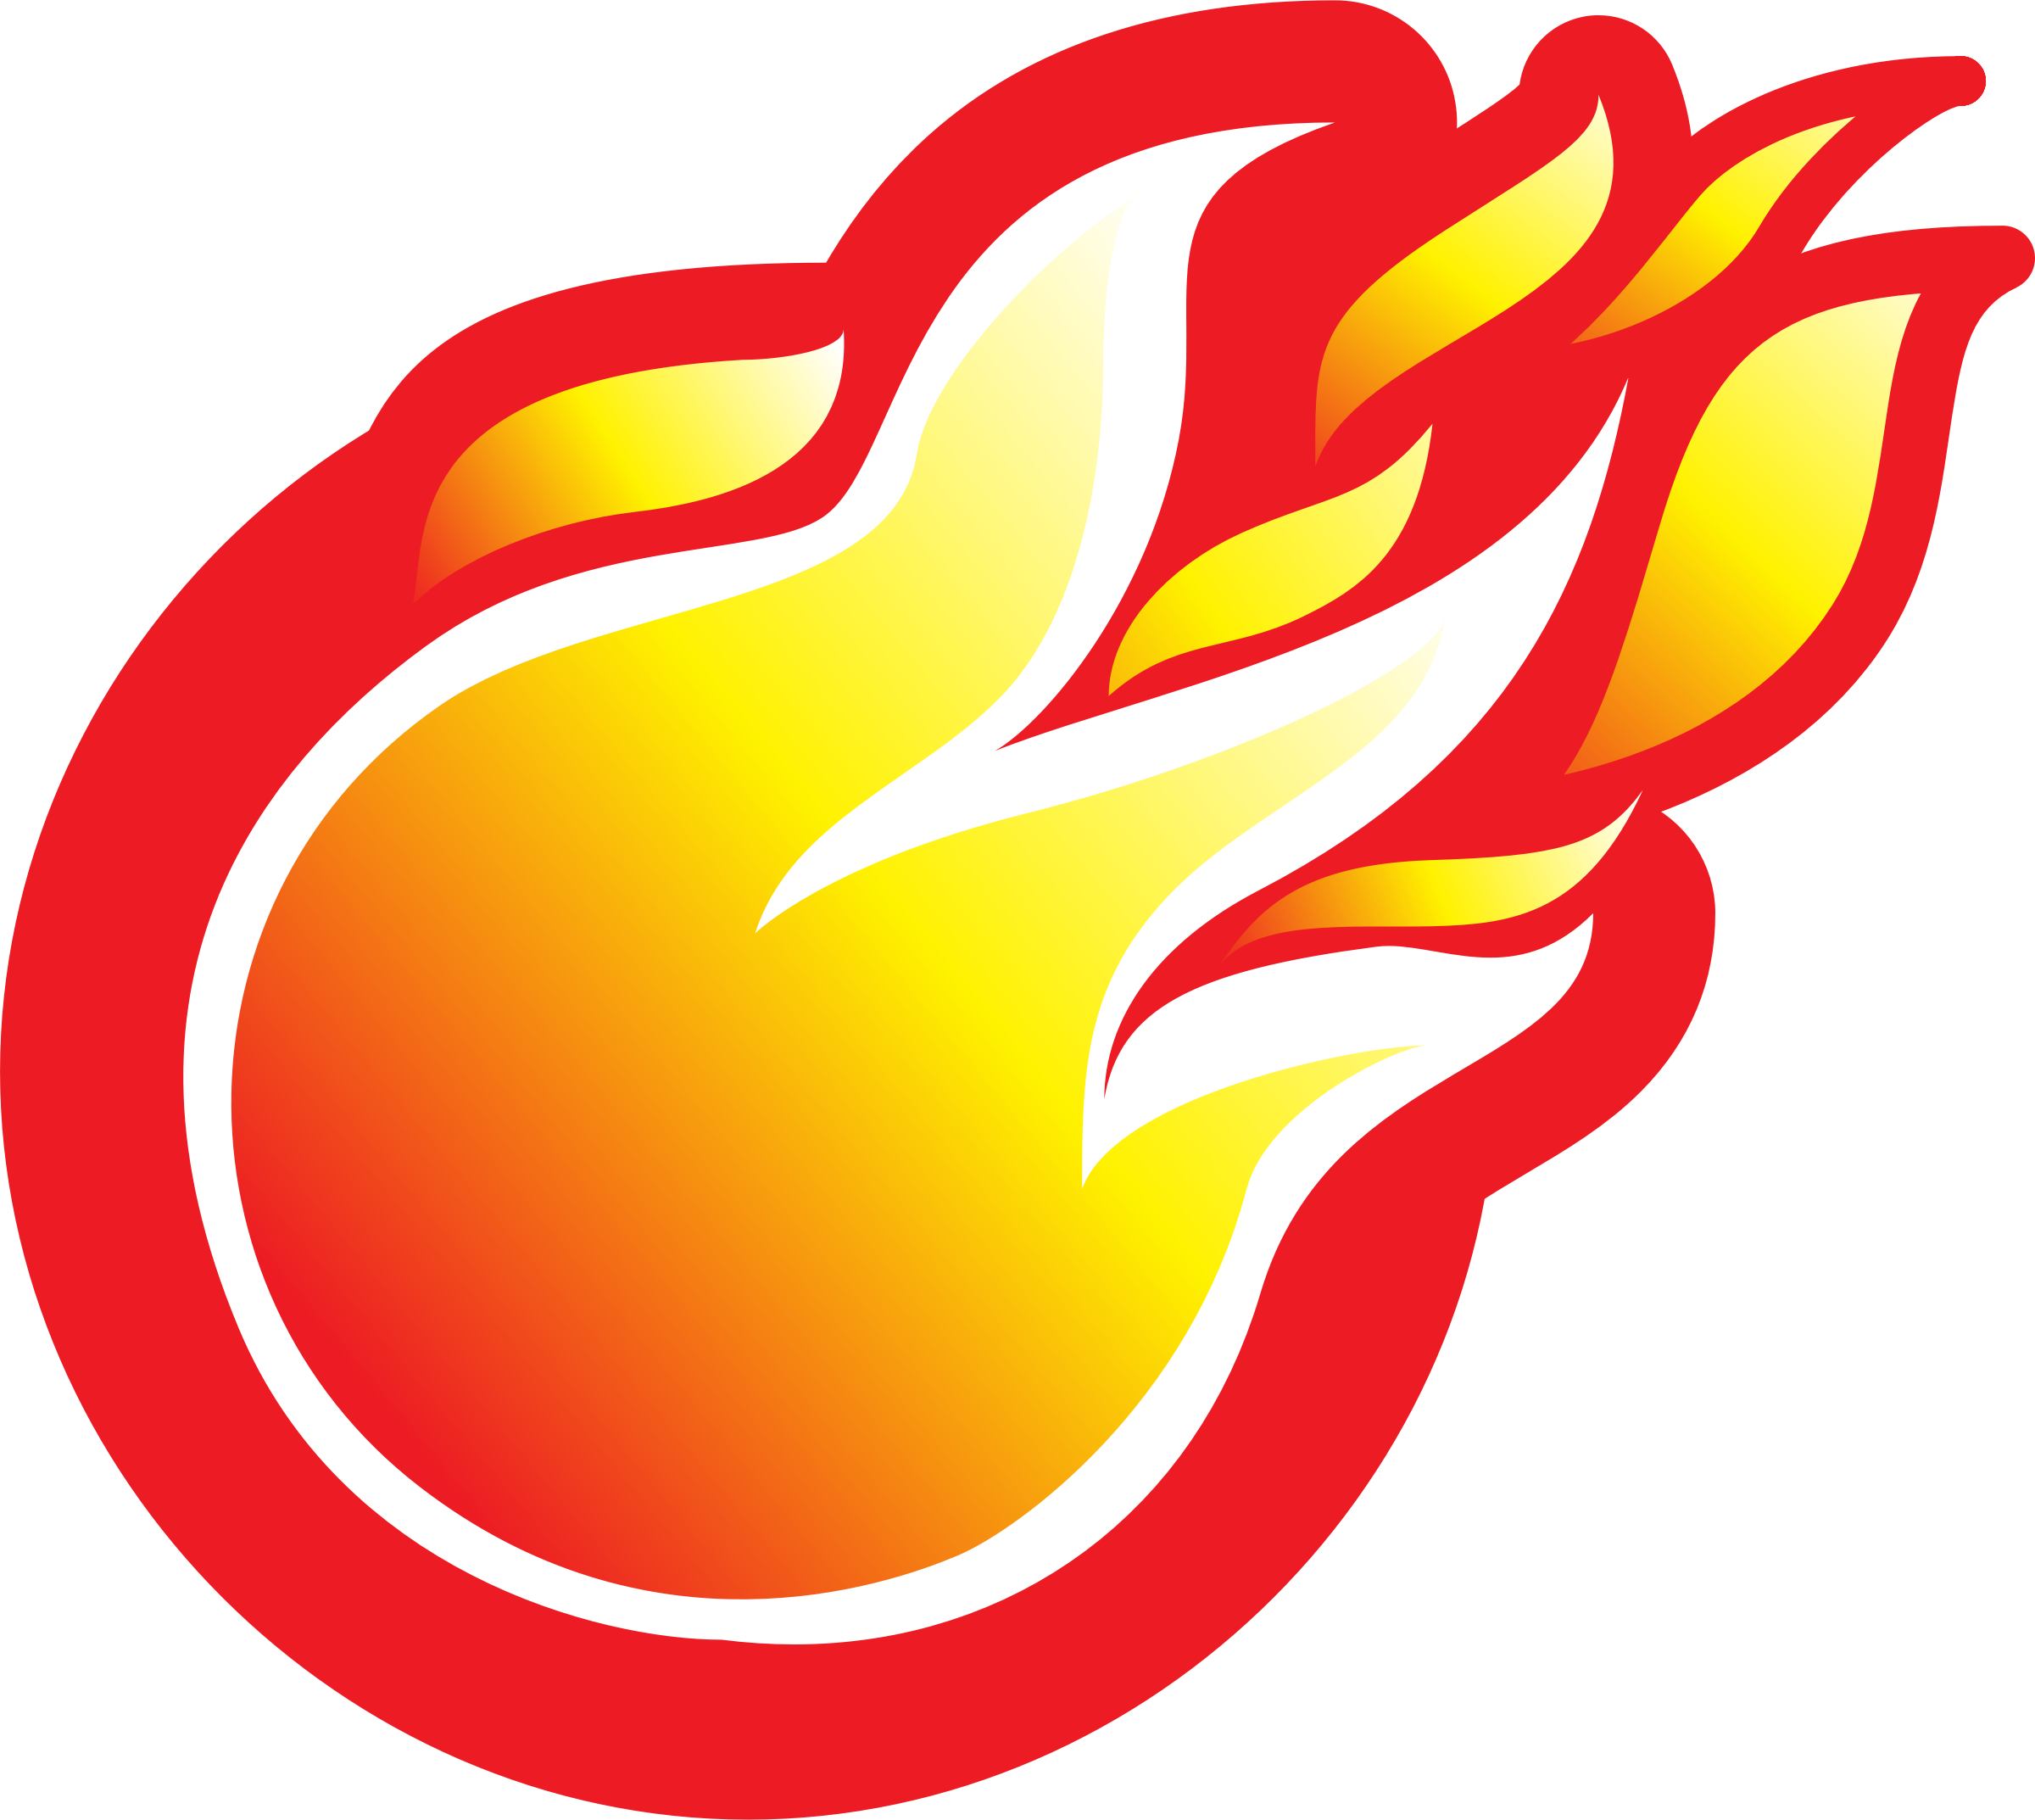 Flame clip art vector flame graphics image 4